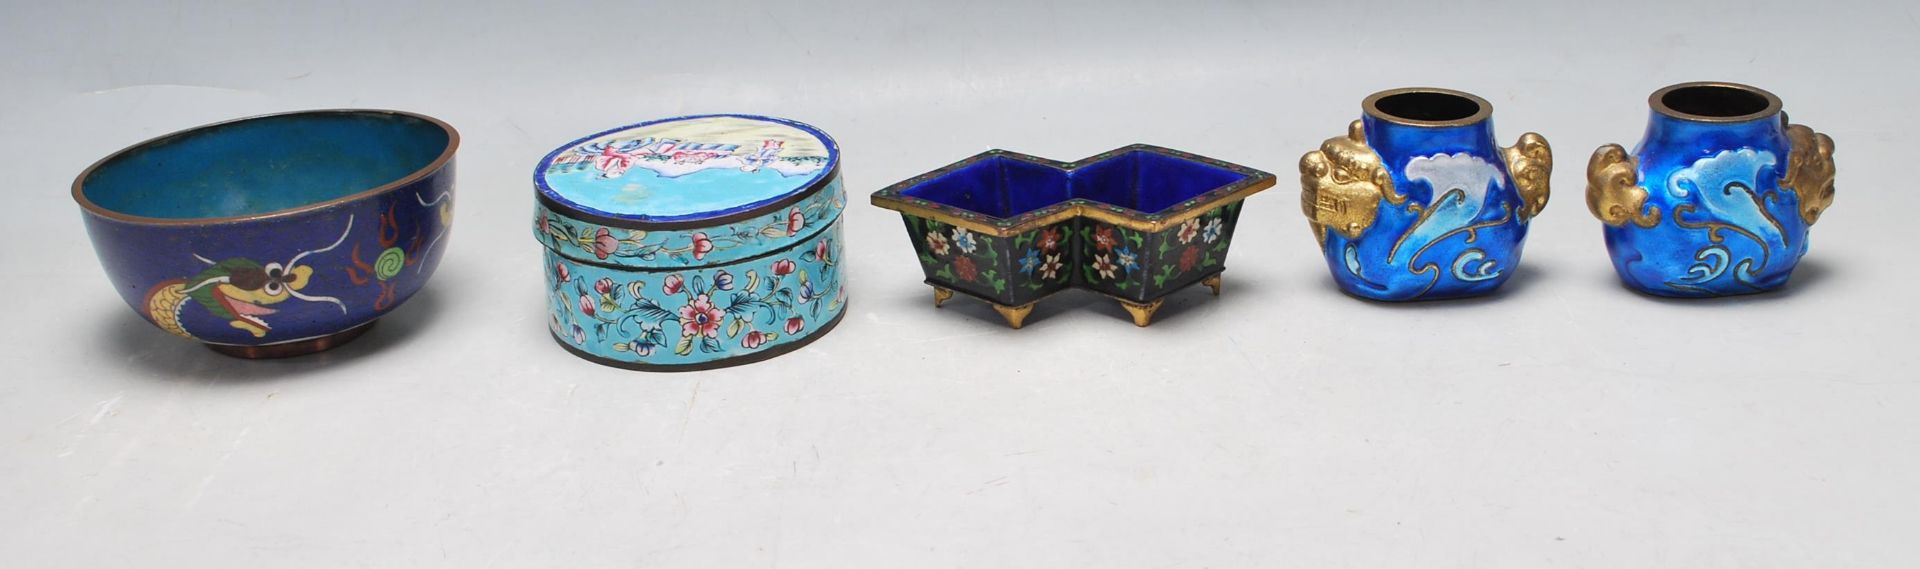 FIVE EARLY 20TH CENTURY CHINESE ENAMEL BOWLS - Image 3 of 5